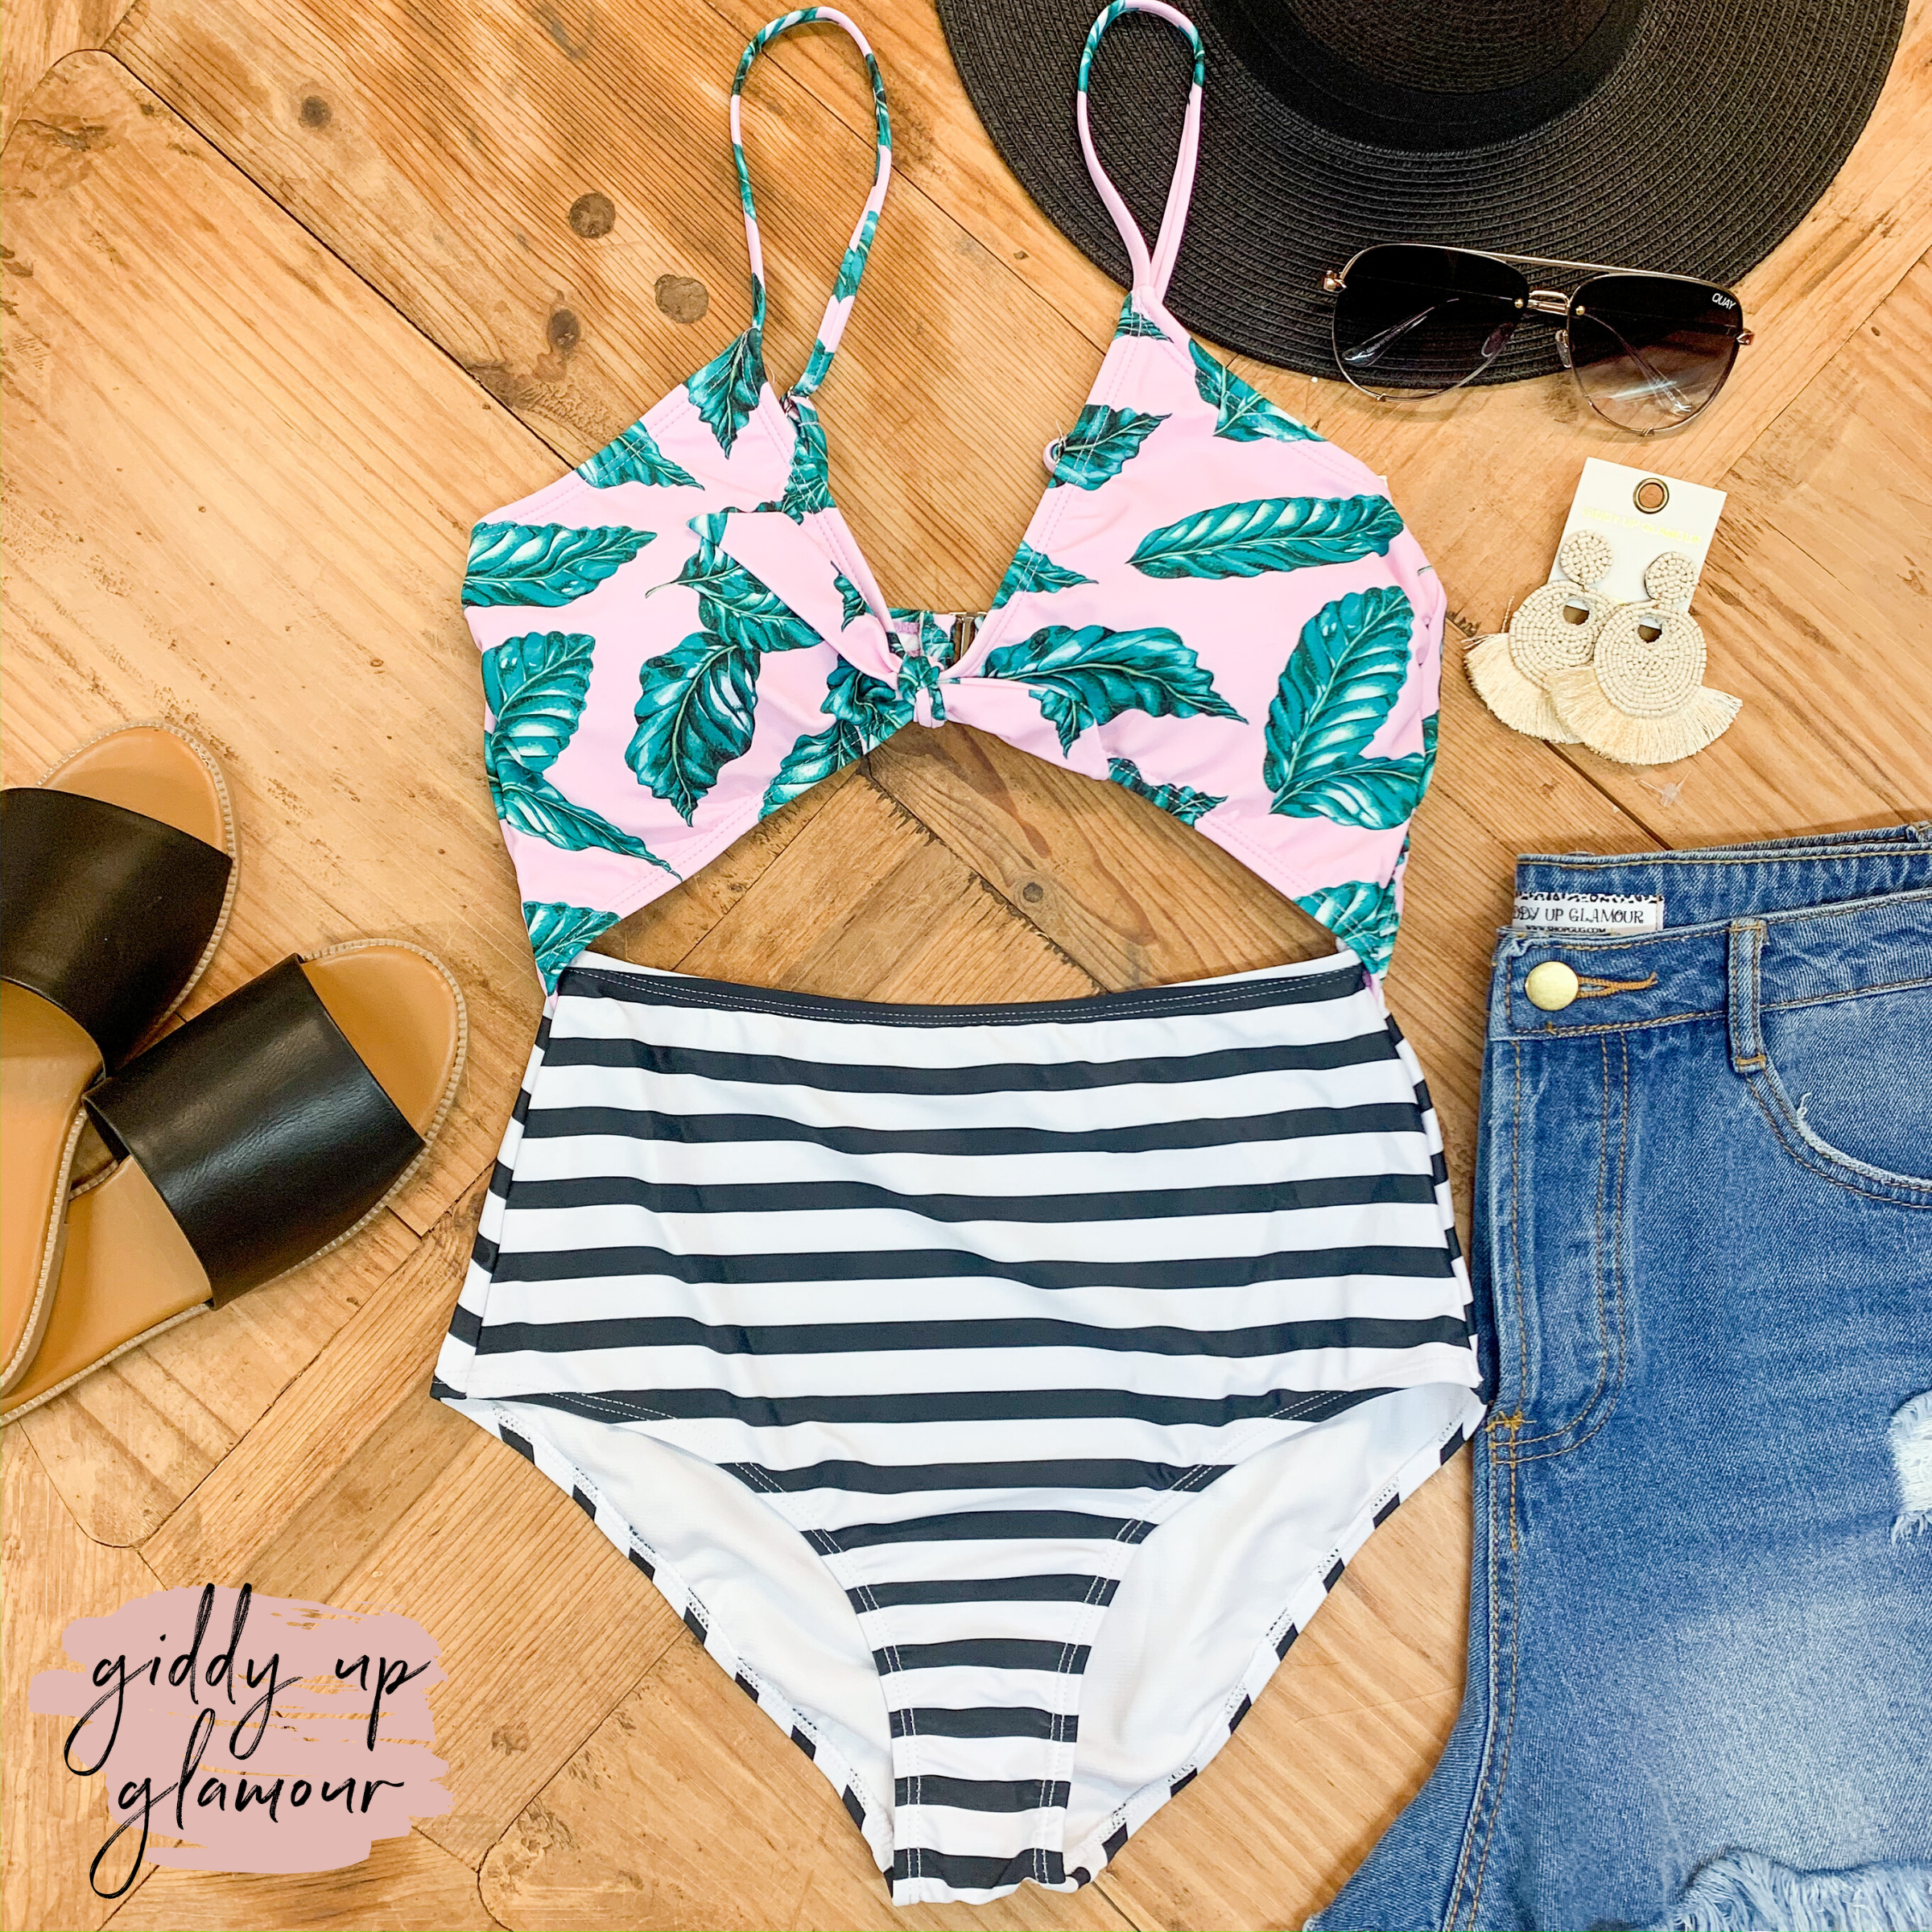 High Tide Open Front and Back One Piece Swimsuit in Palm Leaves and Stripes - Giddy Up Glamour Boutique